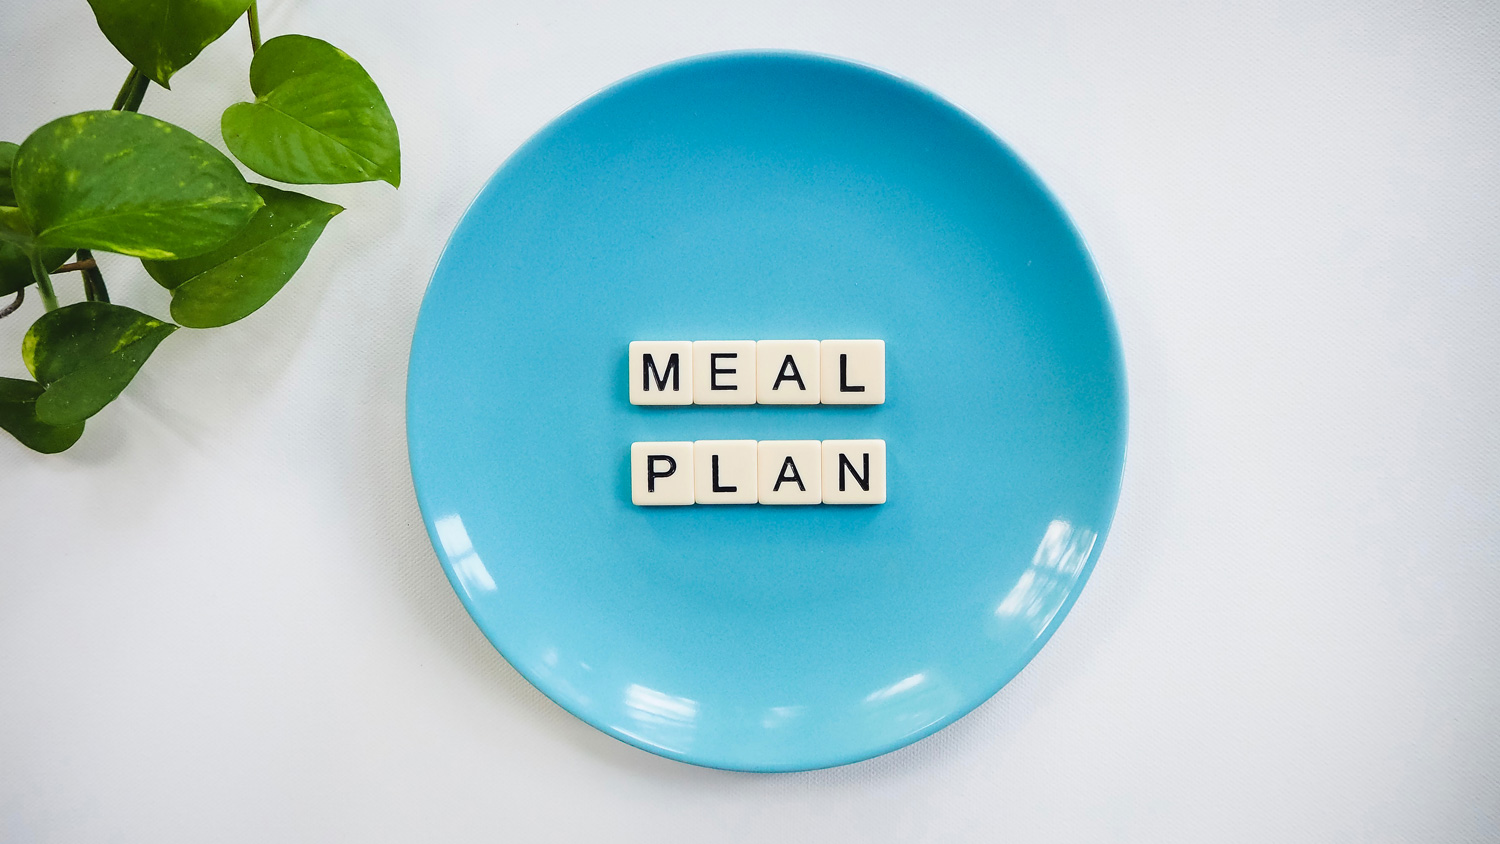 14-Day Free Trial Of Meal Planning With Emeals